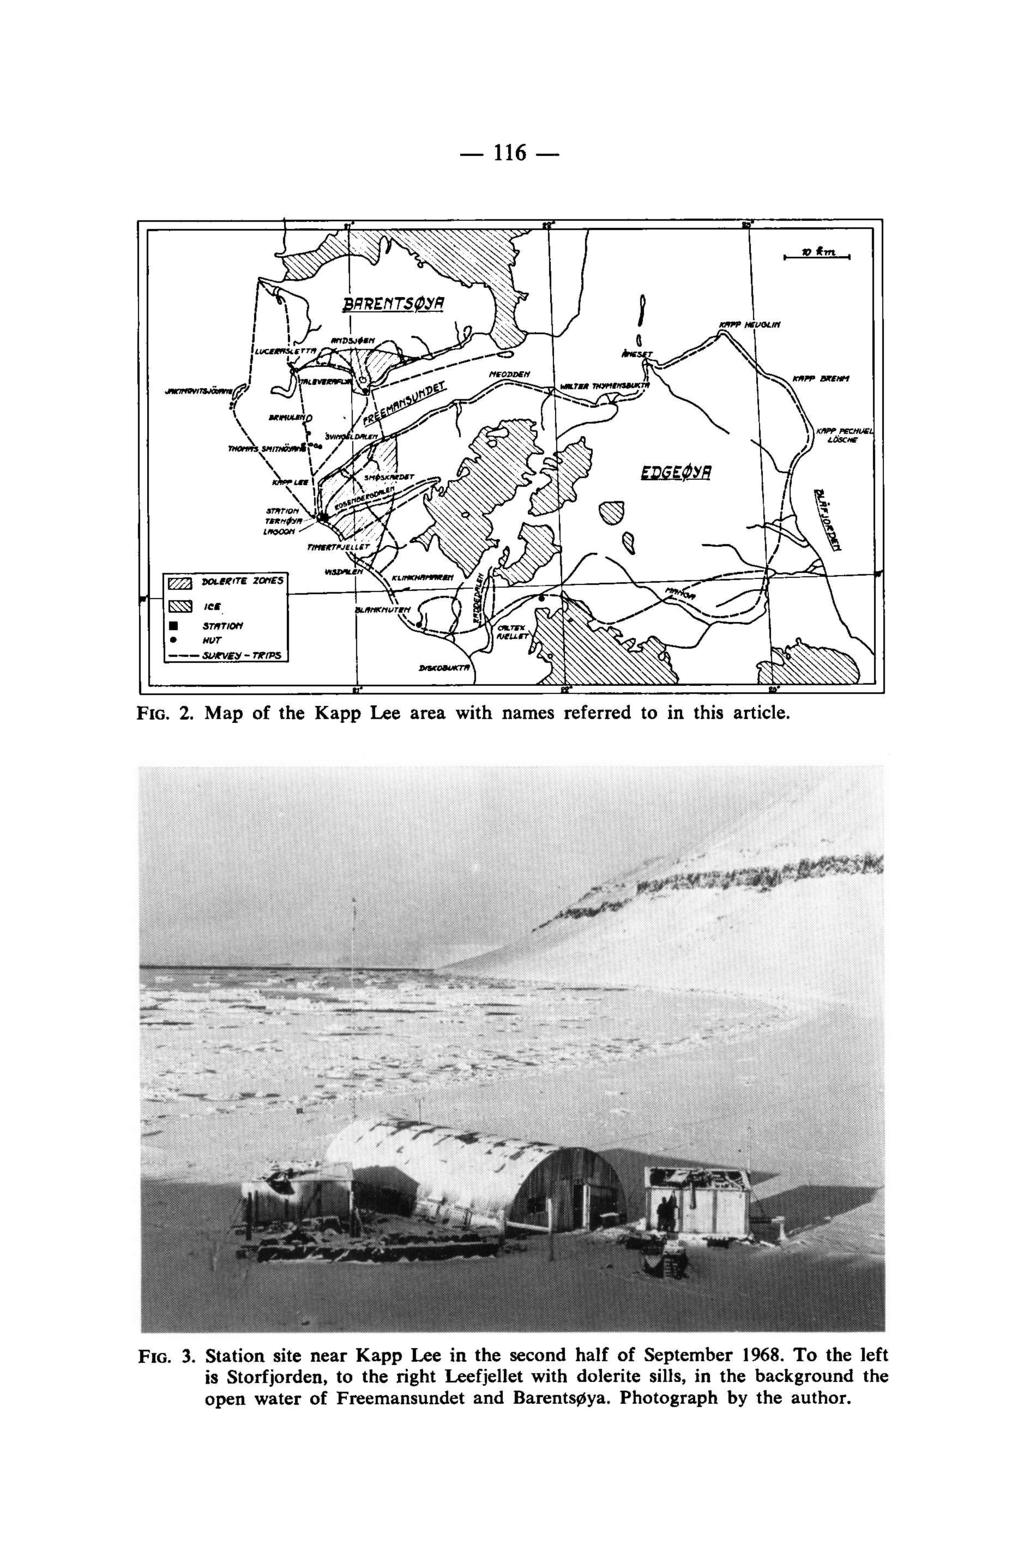 116 FIG. 2. Map of the Kapp Lee area with names referred to in this article. FIG. 3. Station site near Kapp Lee in the second half of September 1968.